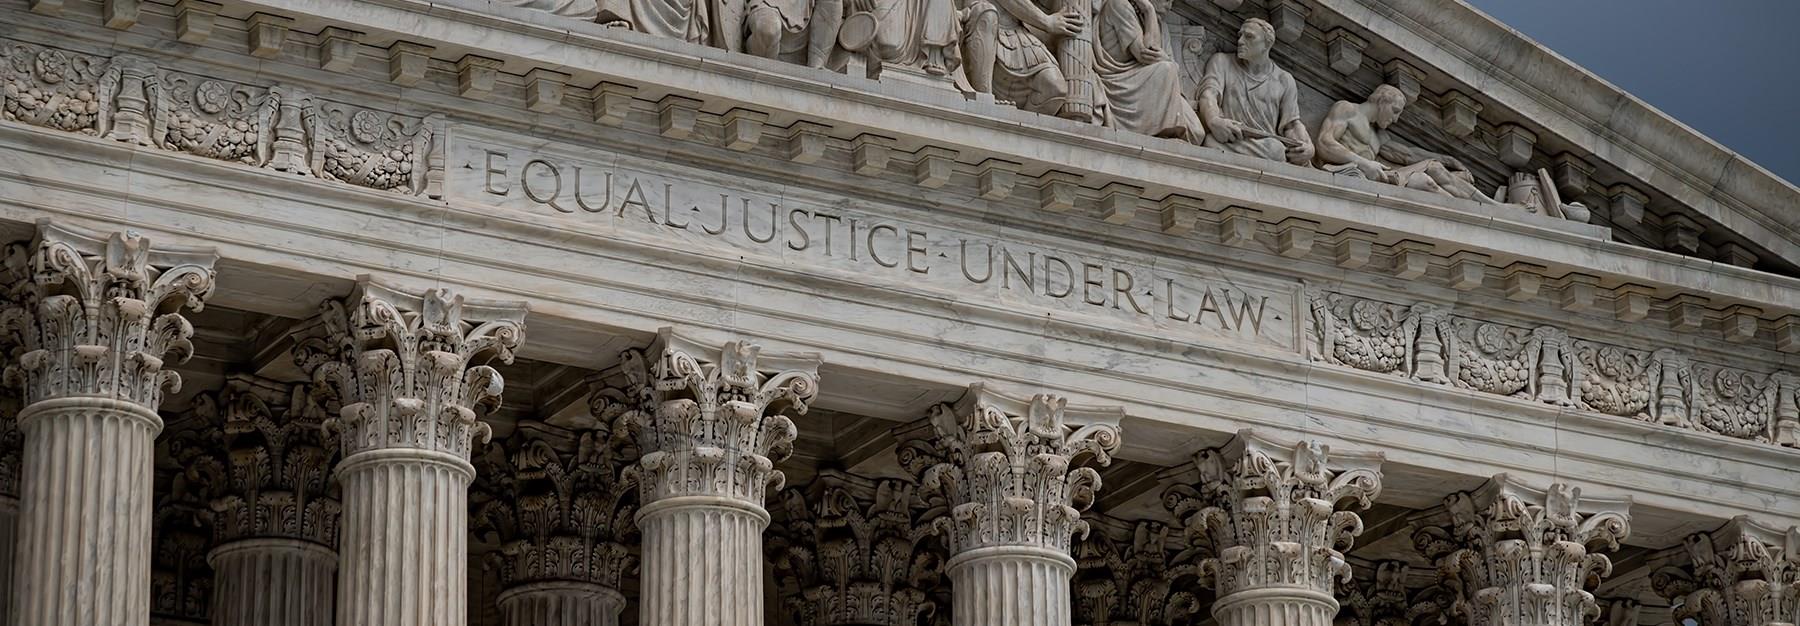 The False Claims Act at the Supreme Court